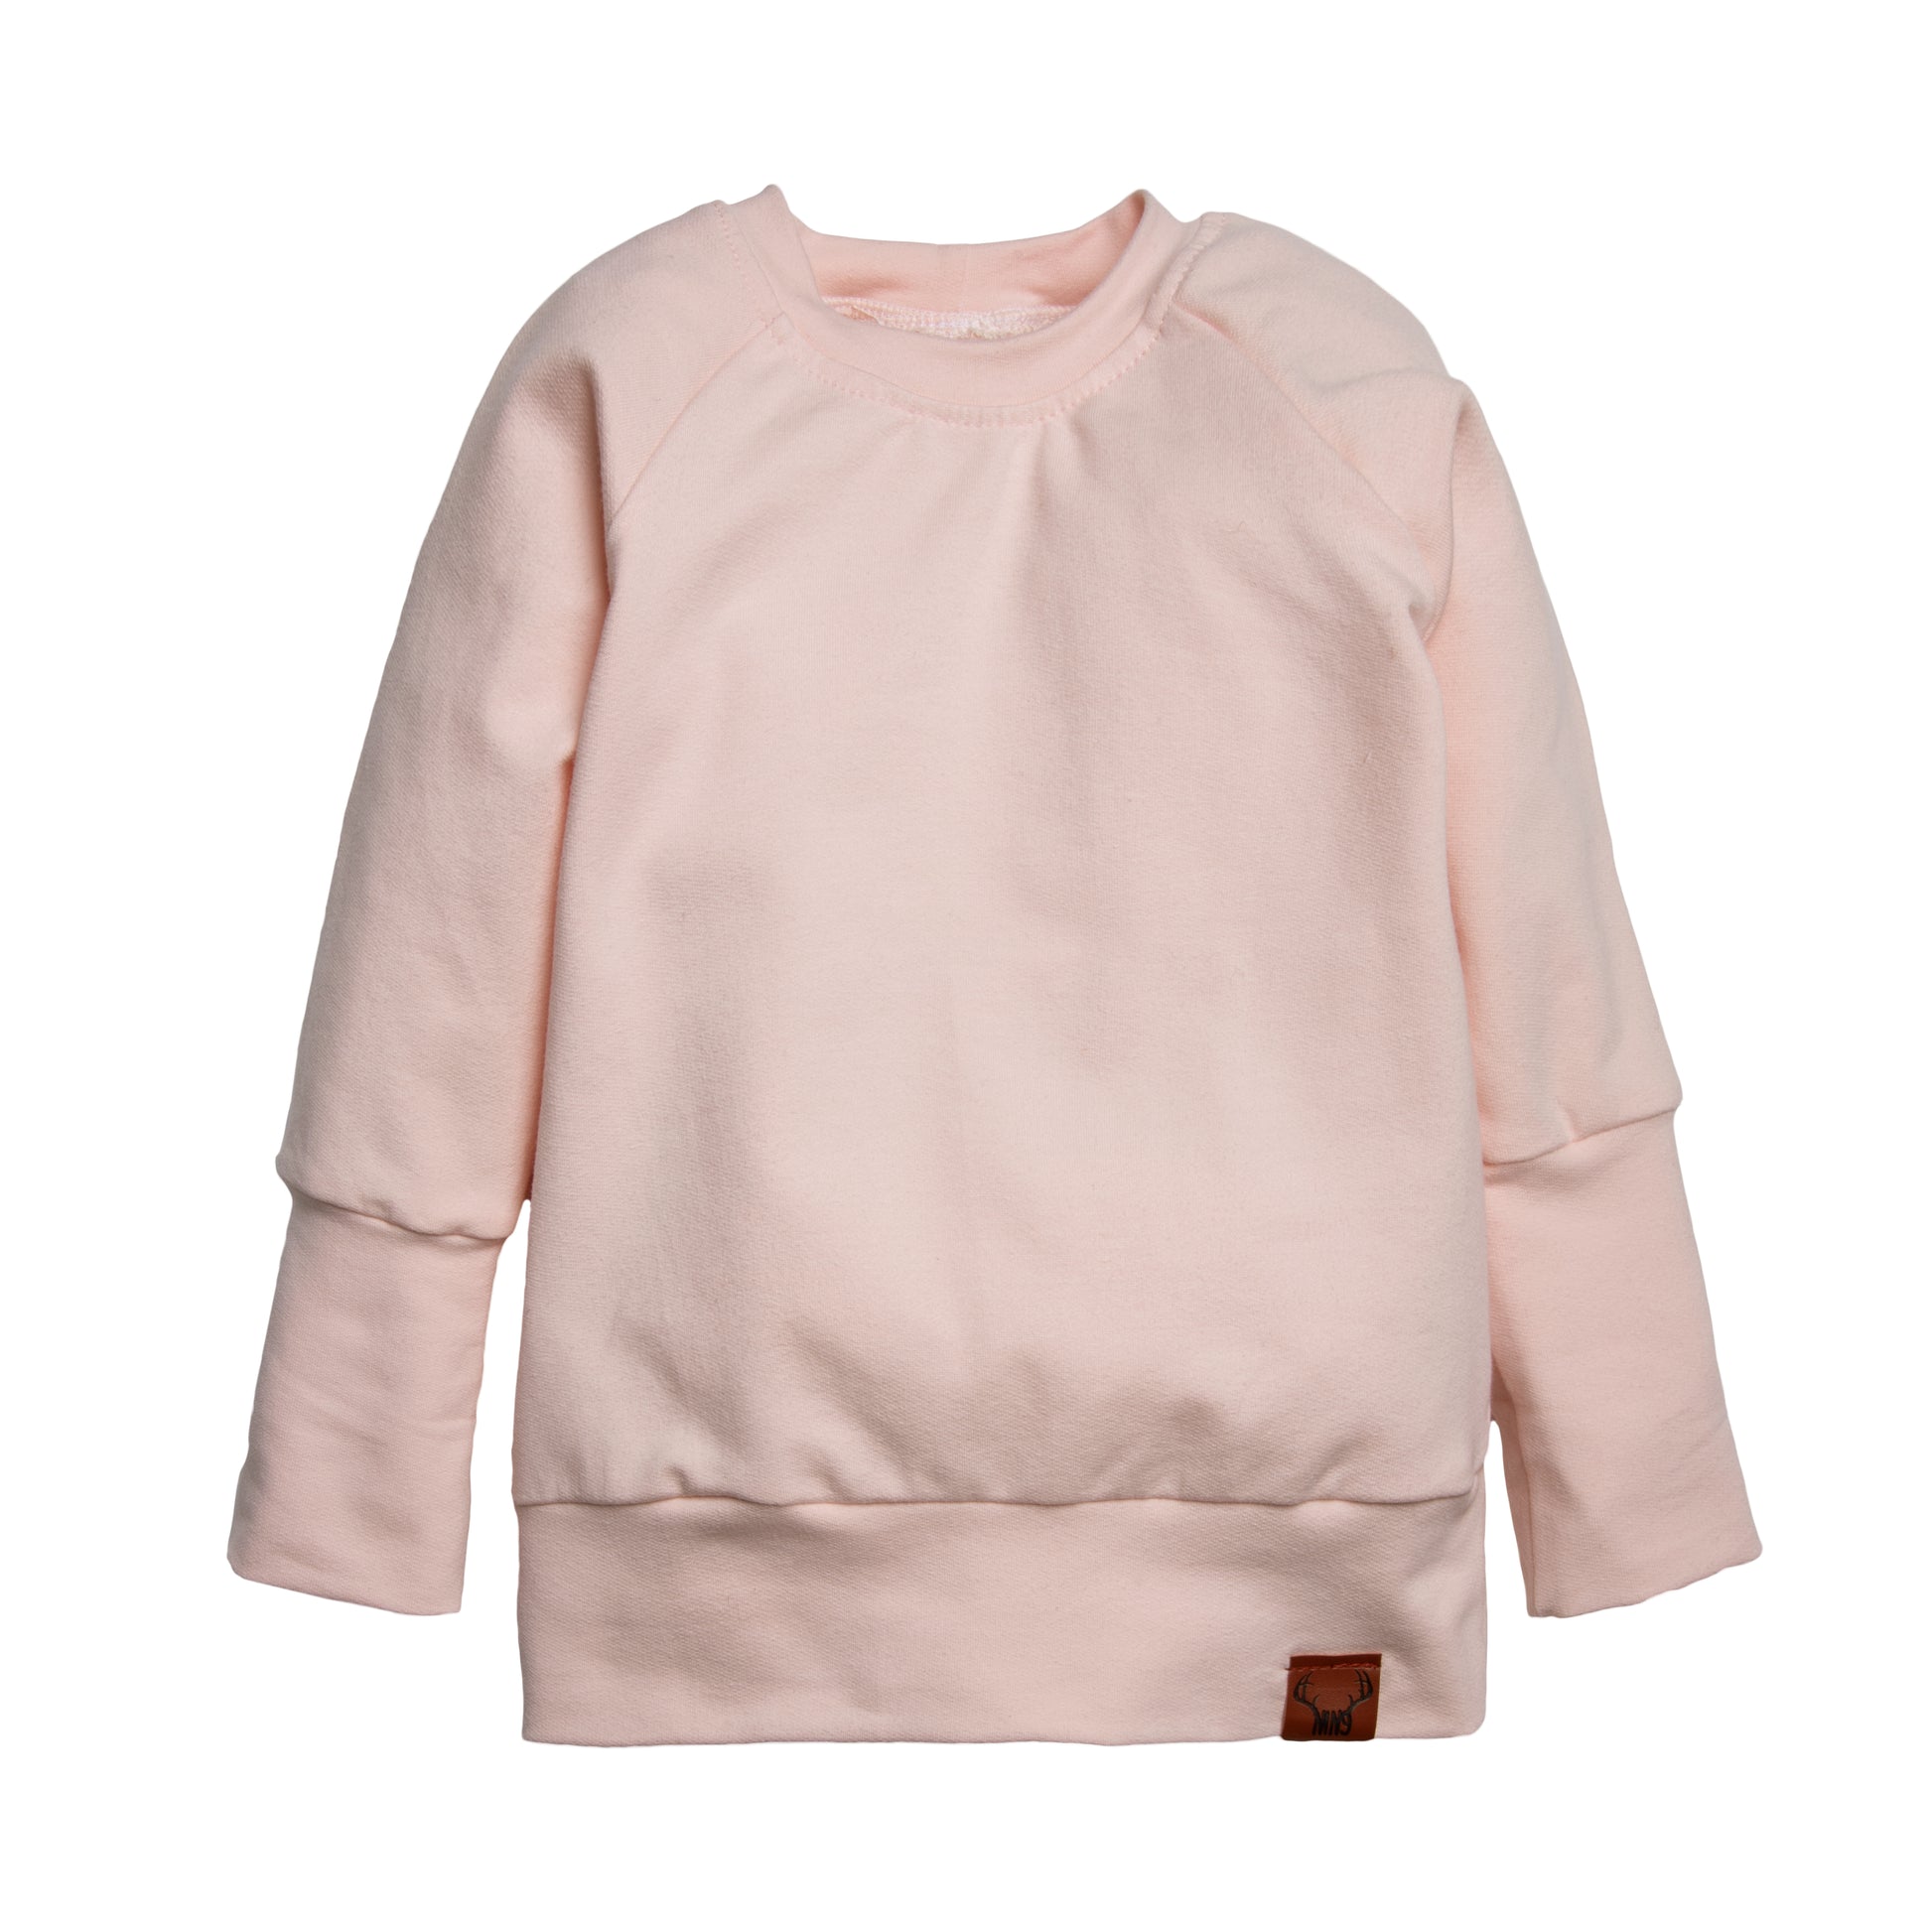 Chandail évolutif rose NineClothing grow with me pink sweater